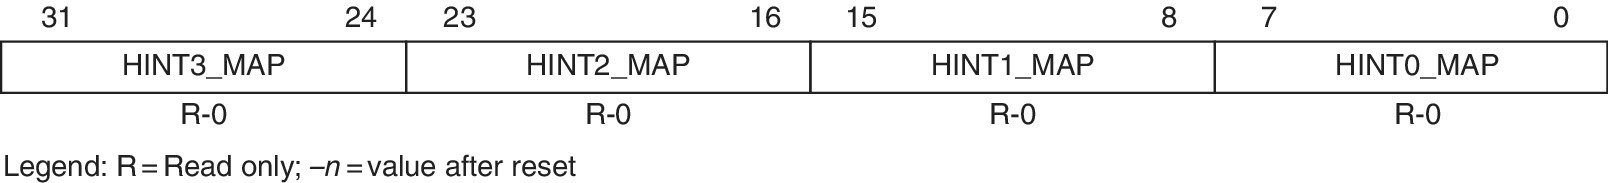 Illustration of host interrupt map registers, displaying a rectangle divided into 4 labeled HINT0_MAP (0–7), HINT1_MAP (8–15), HINT2_MAP (16–23), and HINT3_MAP (24–31).